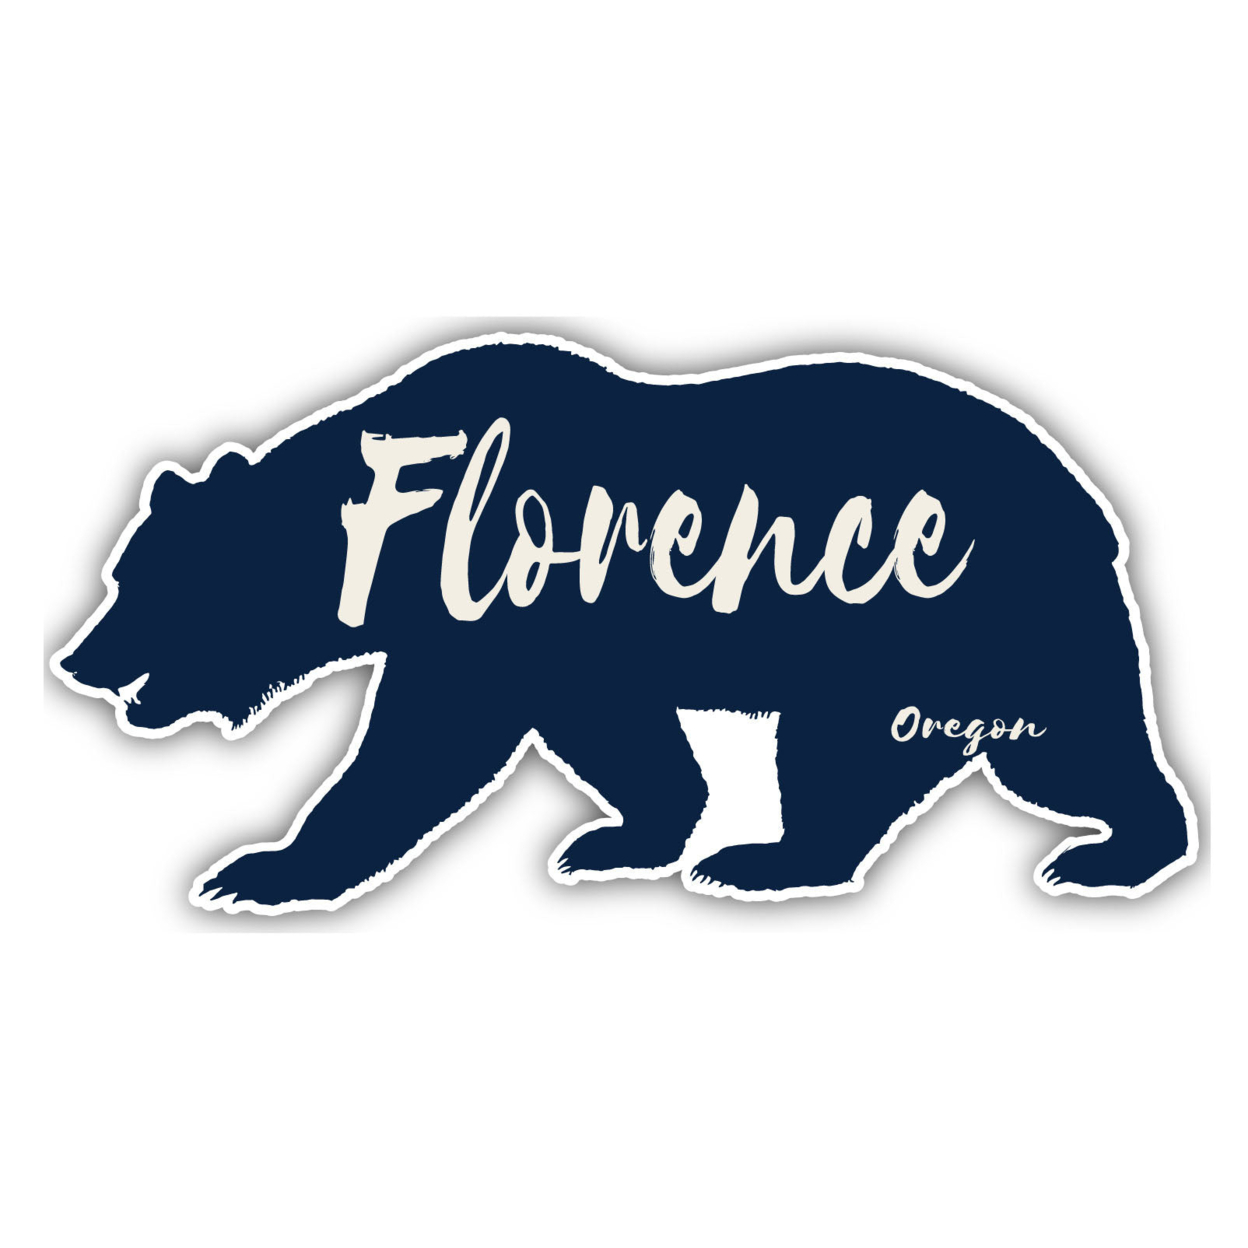 Florence Oregon Souvenir Decorative Stickers (Choose Theme And Size) - 4-Pack, 10-Inch, Bear